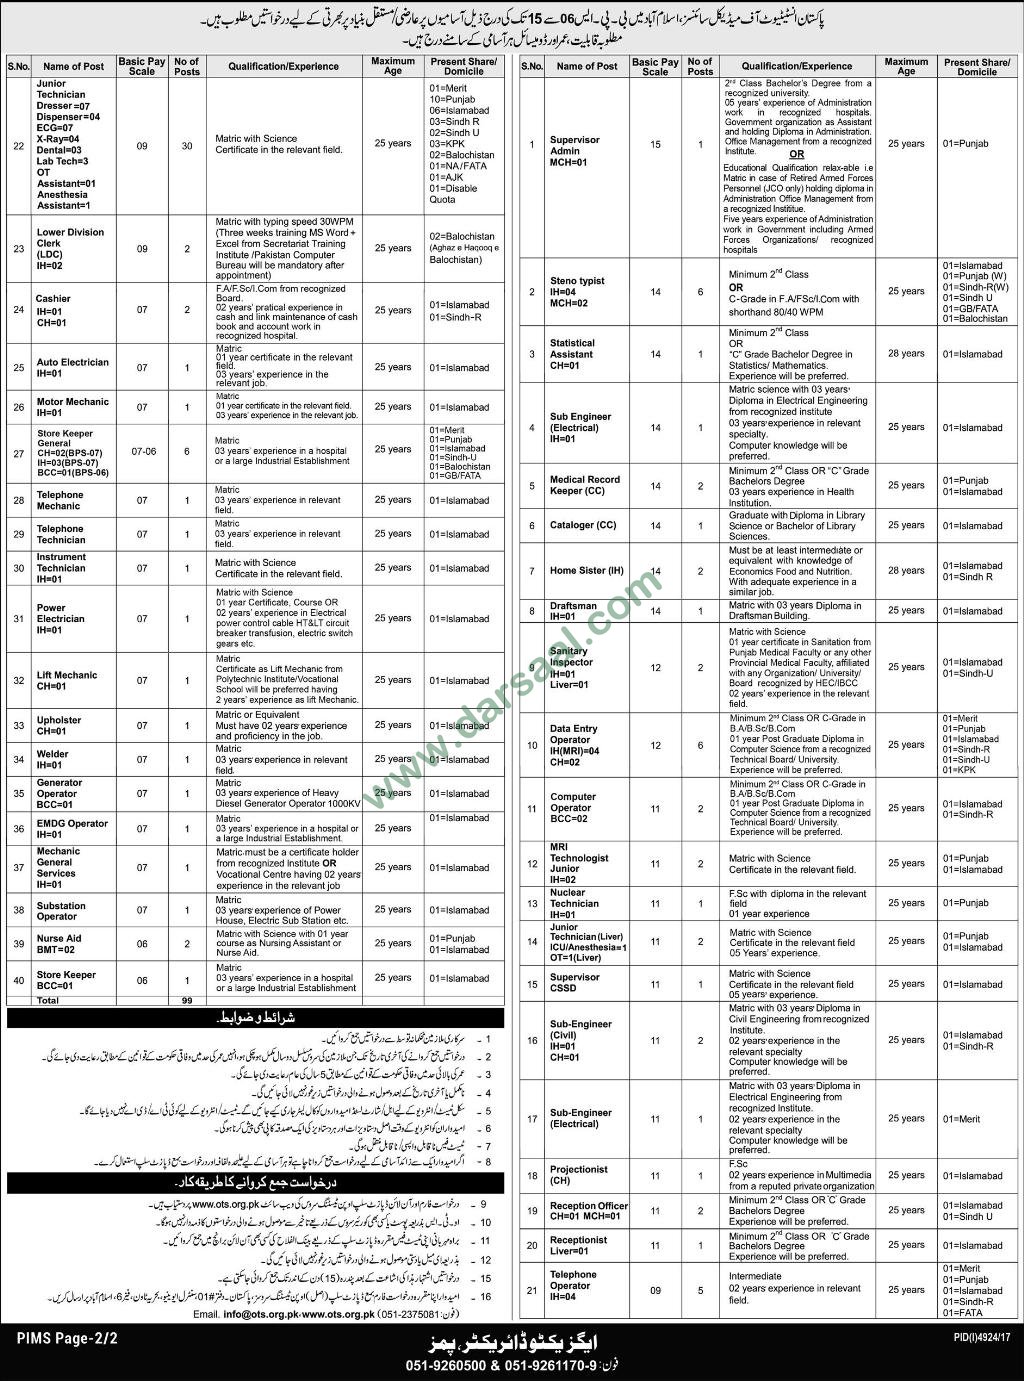 Supervisor, Steno Typist, Statistical Jobs in Pakistan Institute of Medical Sciences Islamabad, 11 March 2018